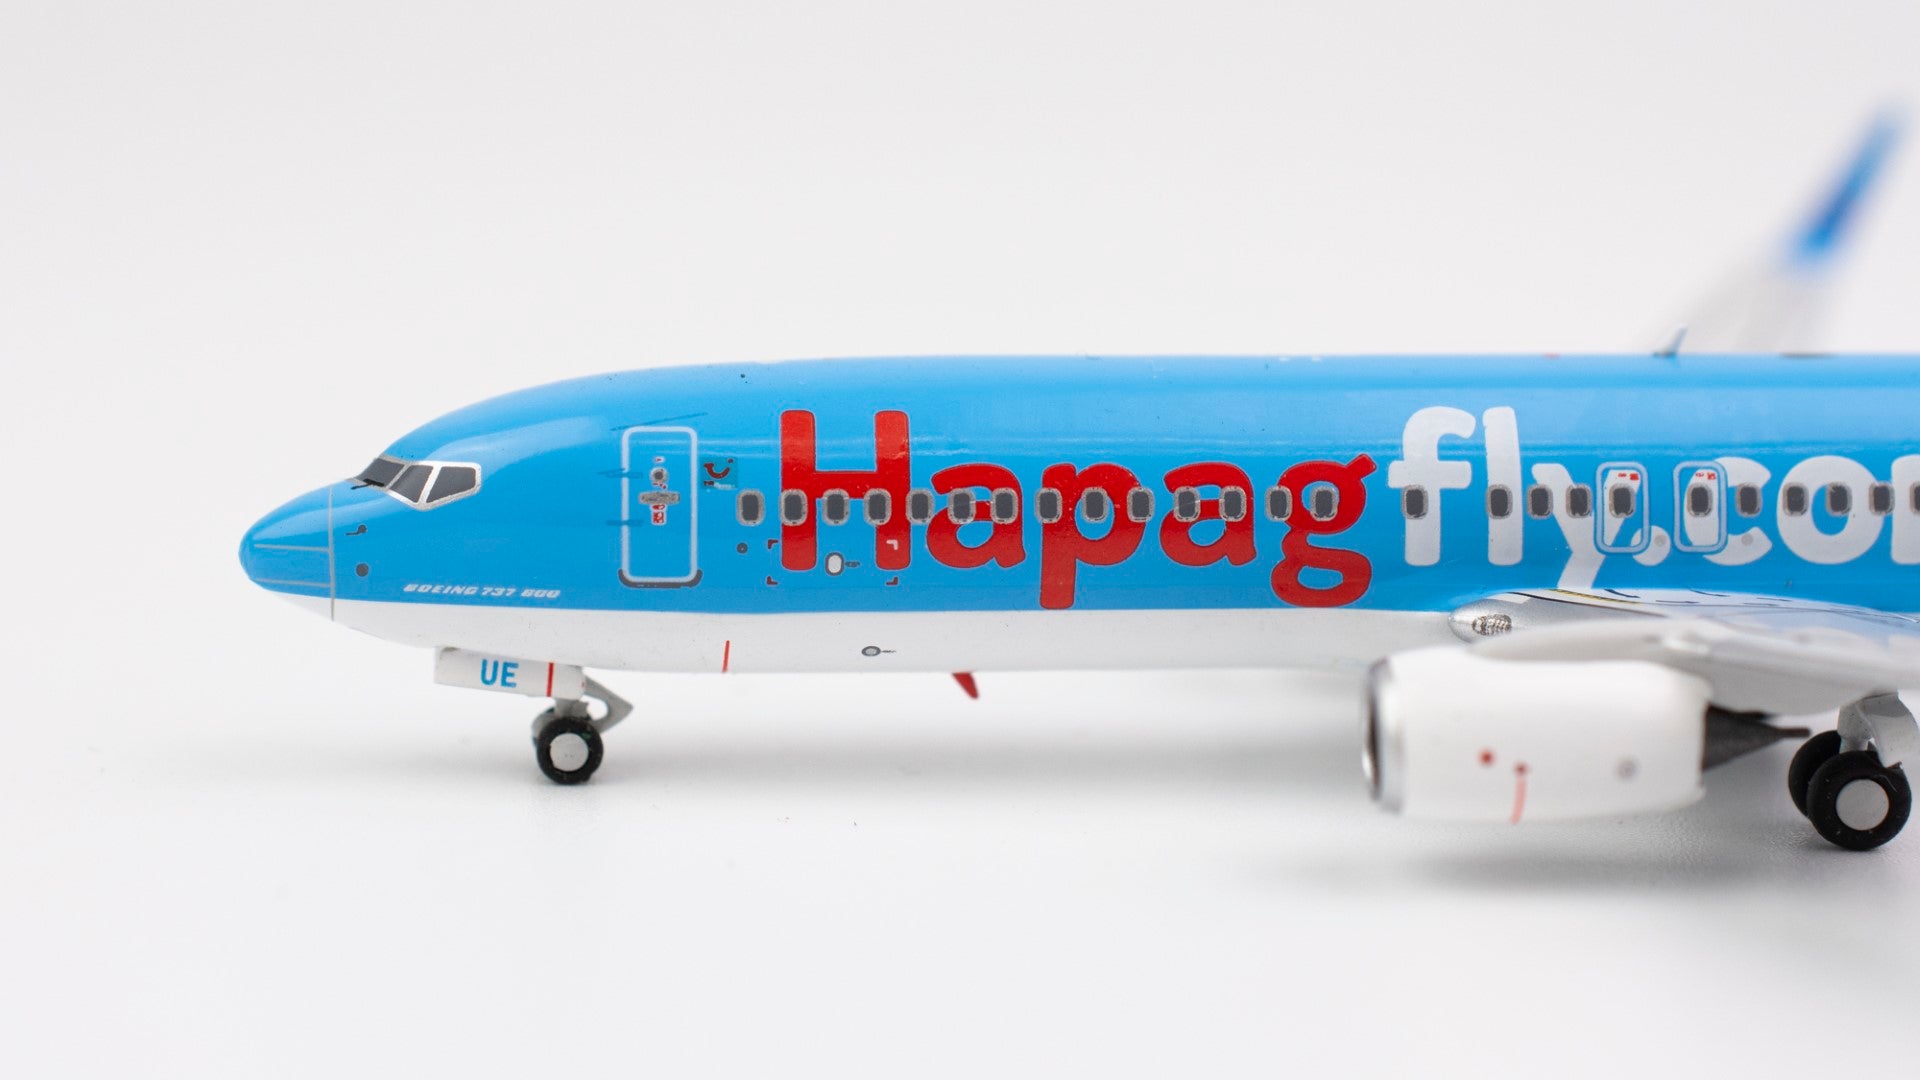 Boeing 737-800 Hapagfly D-ATUE Scale 1/400 - Model